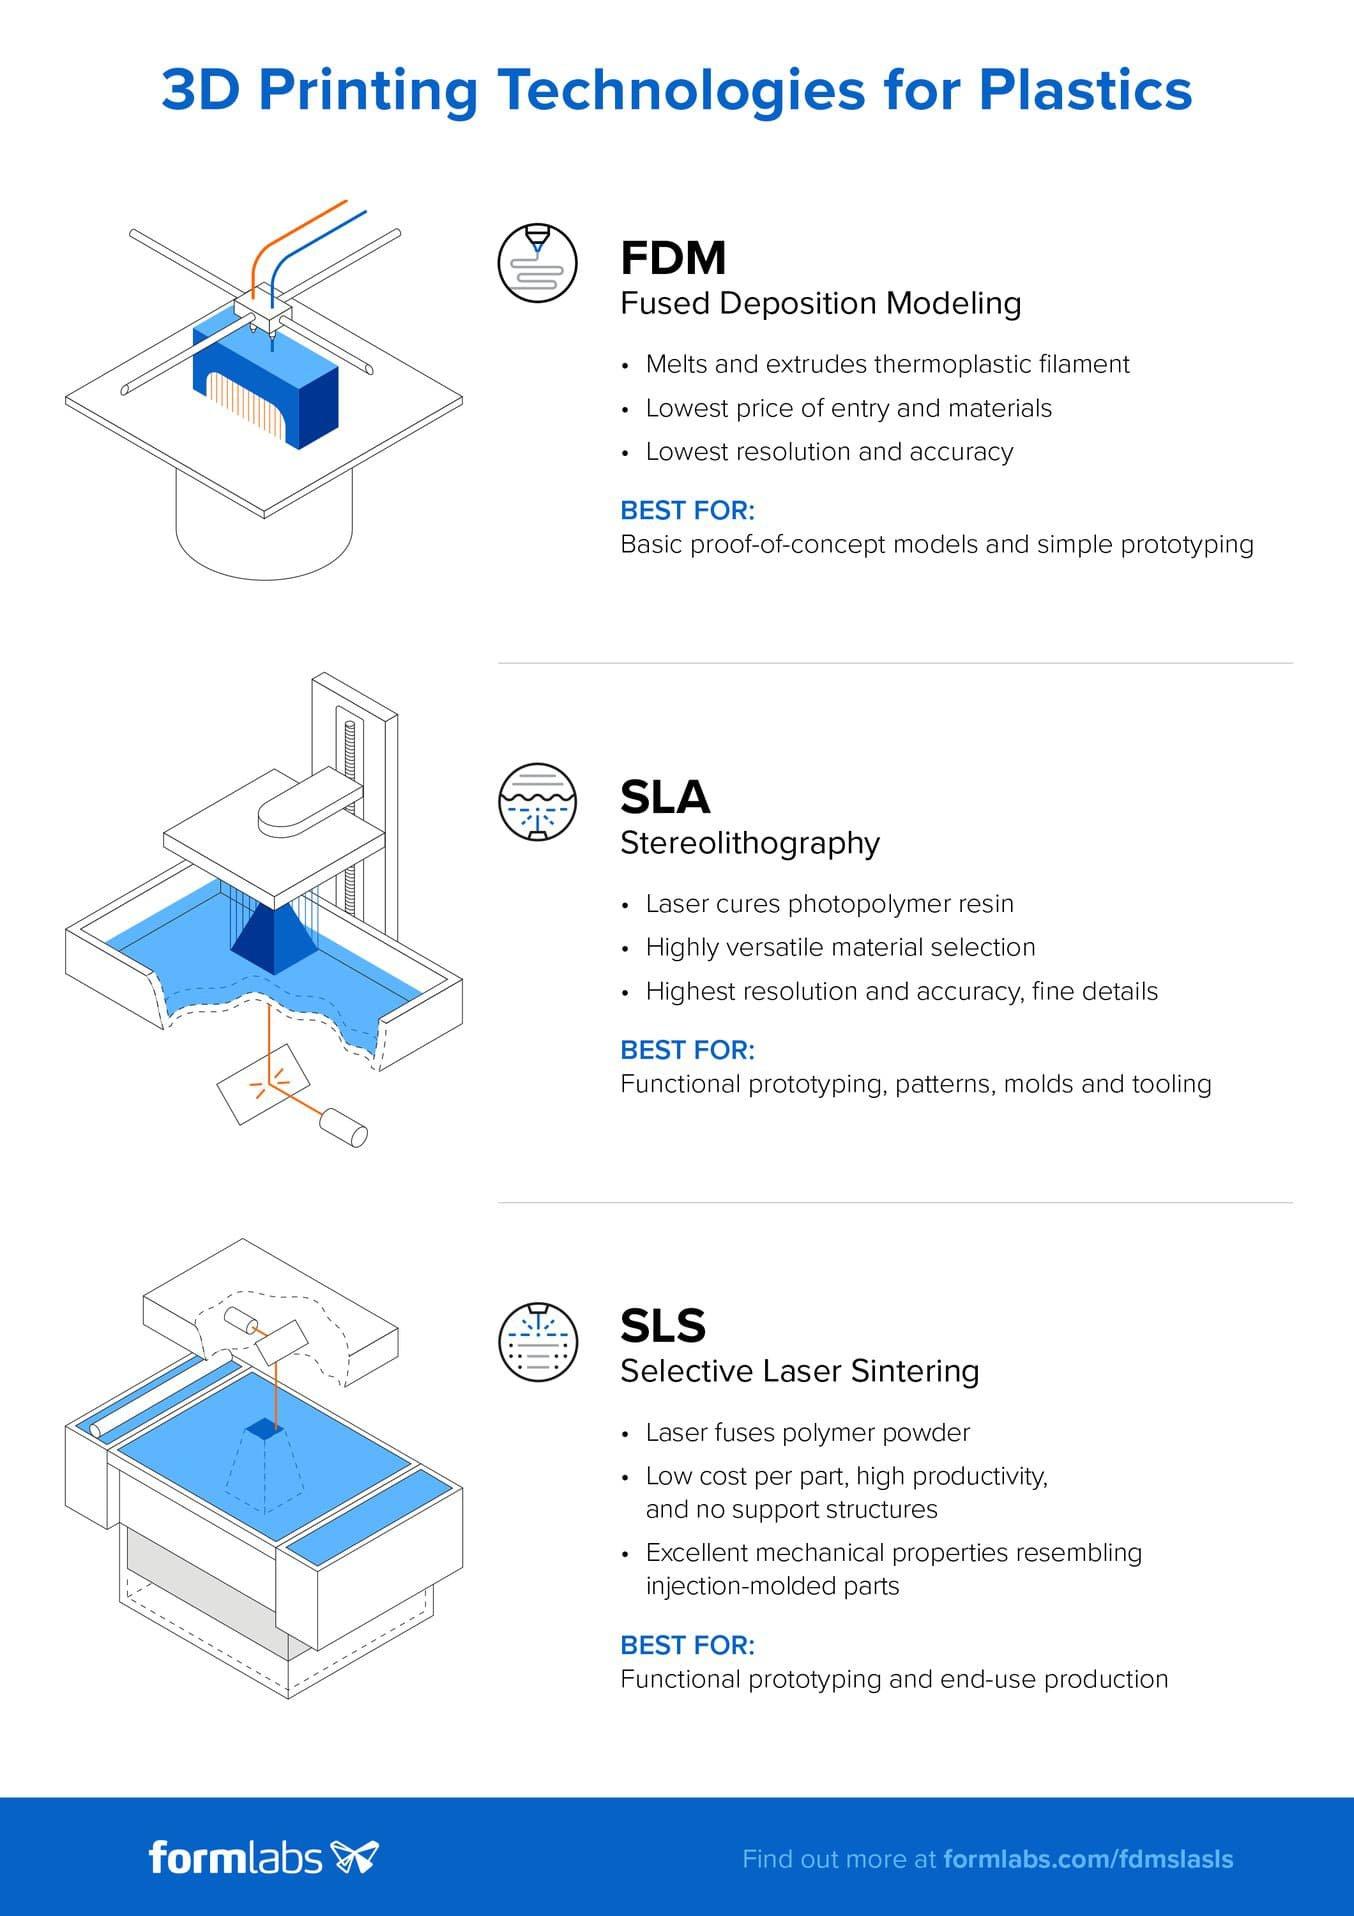 Download the high-resolution version of this infographic here. Would you like to learn more about FDM, SLA, and SLS 3D printing technologies? Check out our in-depth guide.